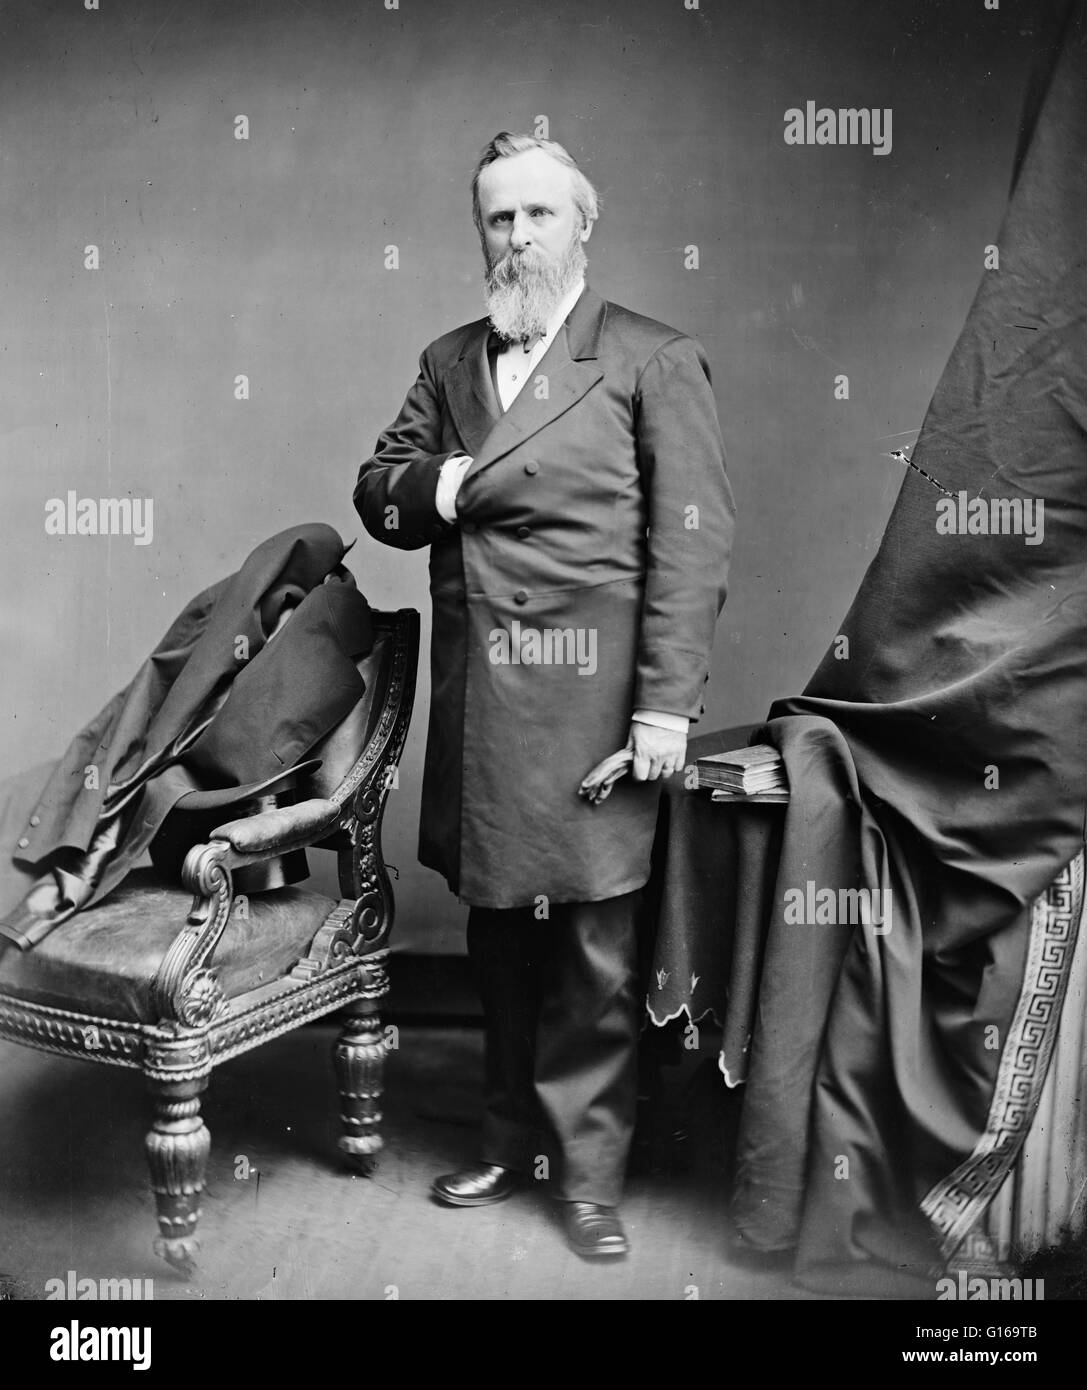 Rutherford Birchard Hayes (October 4, 1822 - January 17, 1893) was the 19th President of the United States (1877-1881). When the Civil War began, he left a successful political career to join the Union Army as an officer. Wounded five times, he earned a r Stock Photo